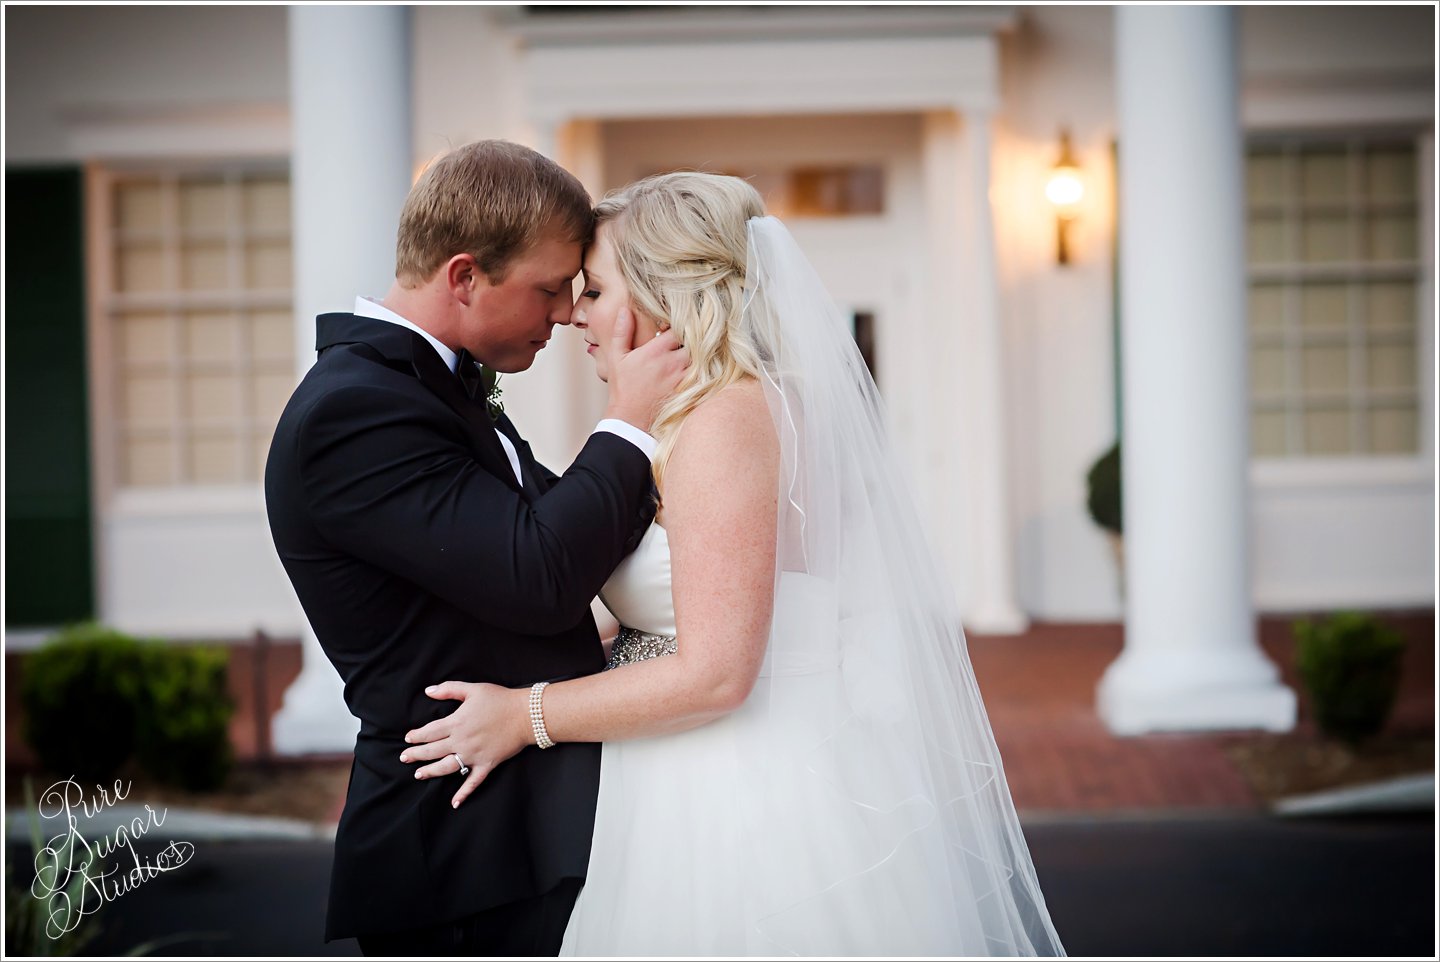 Bridal Portraits at Timuquana Country Club Wedding in front of white clubhouse